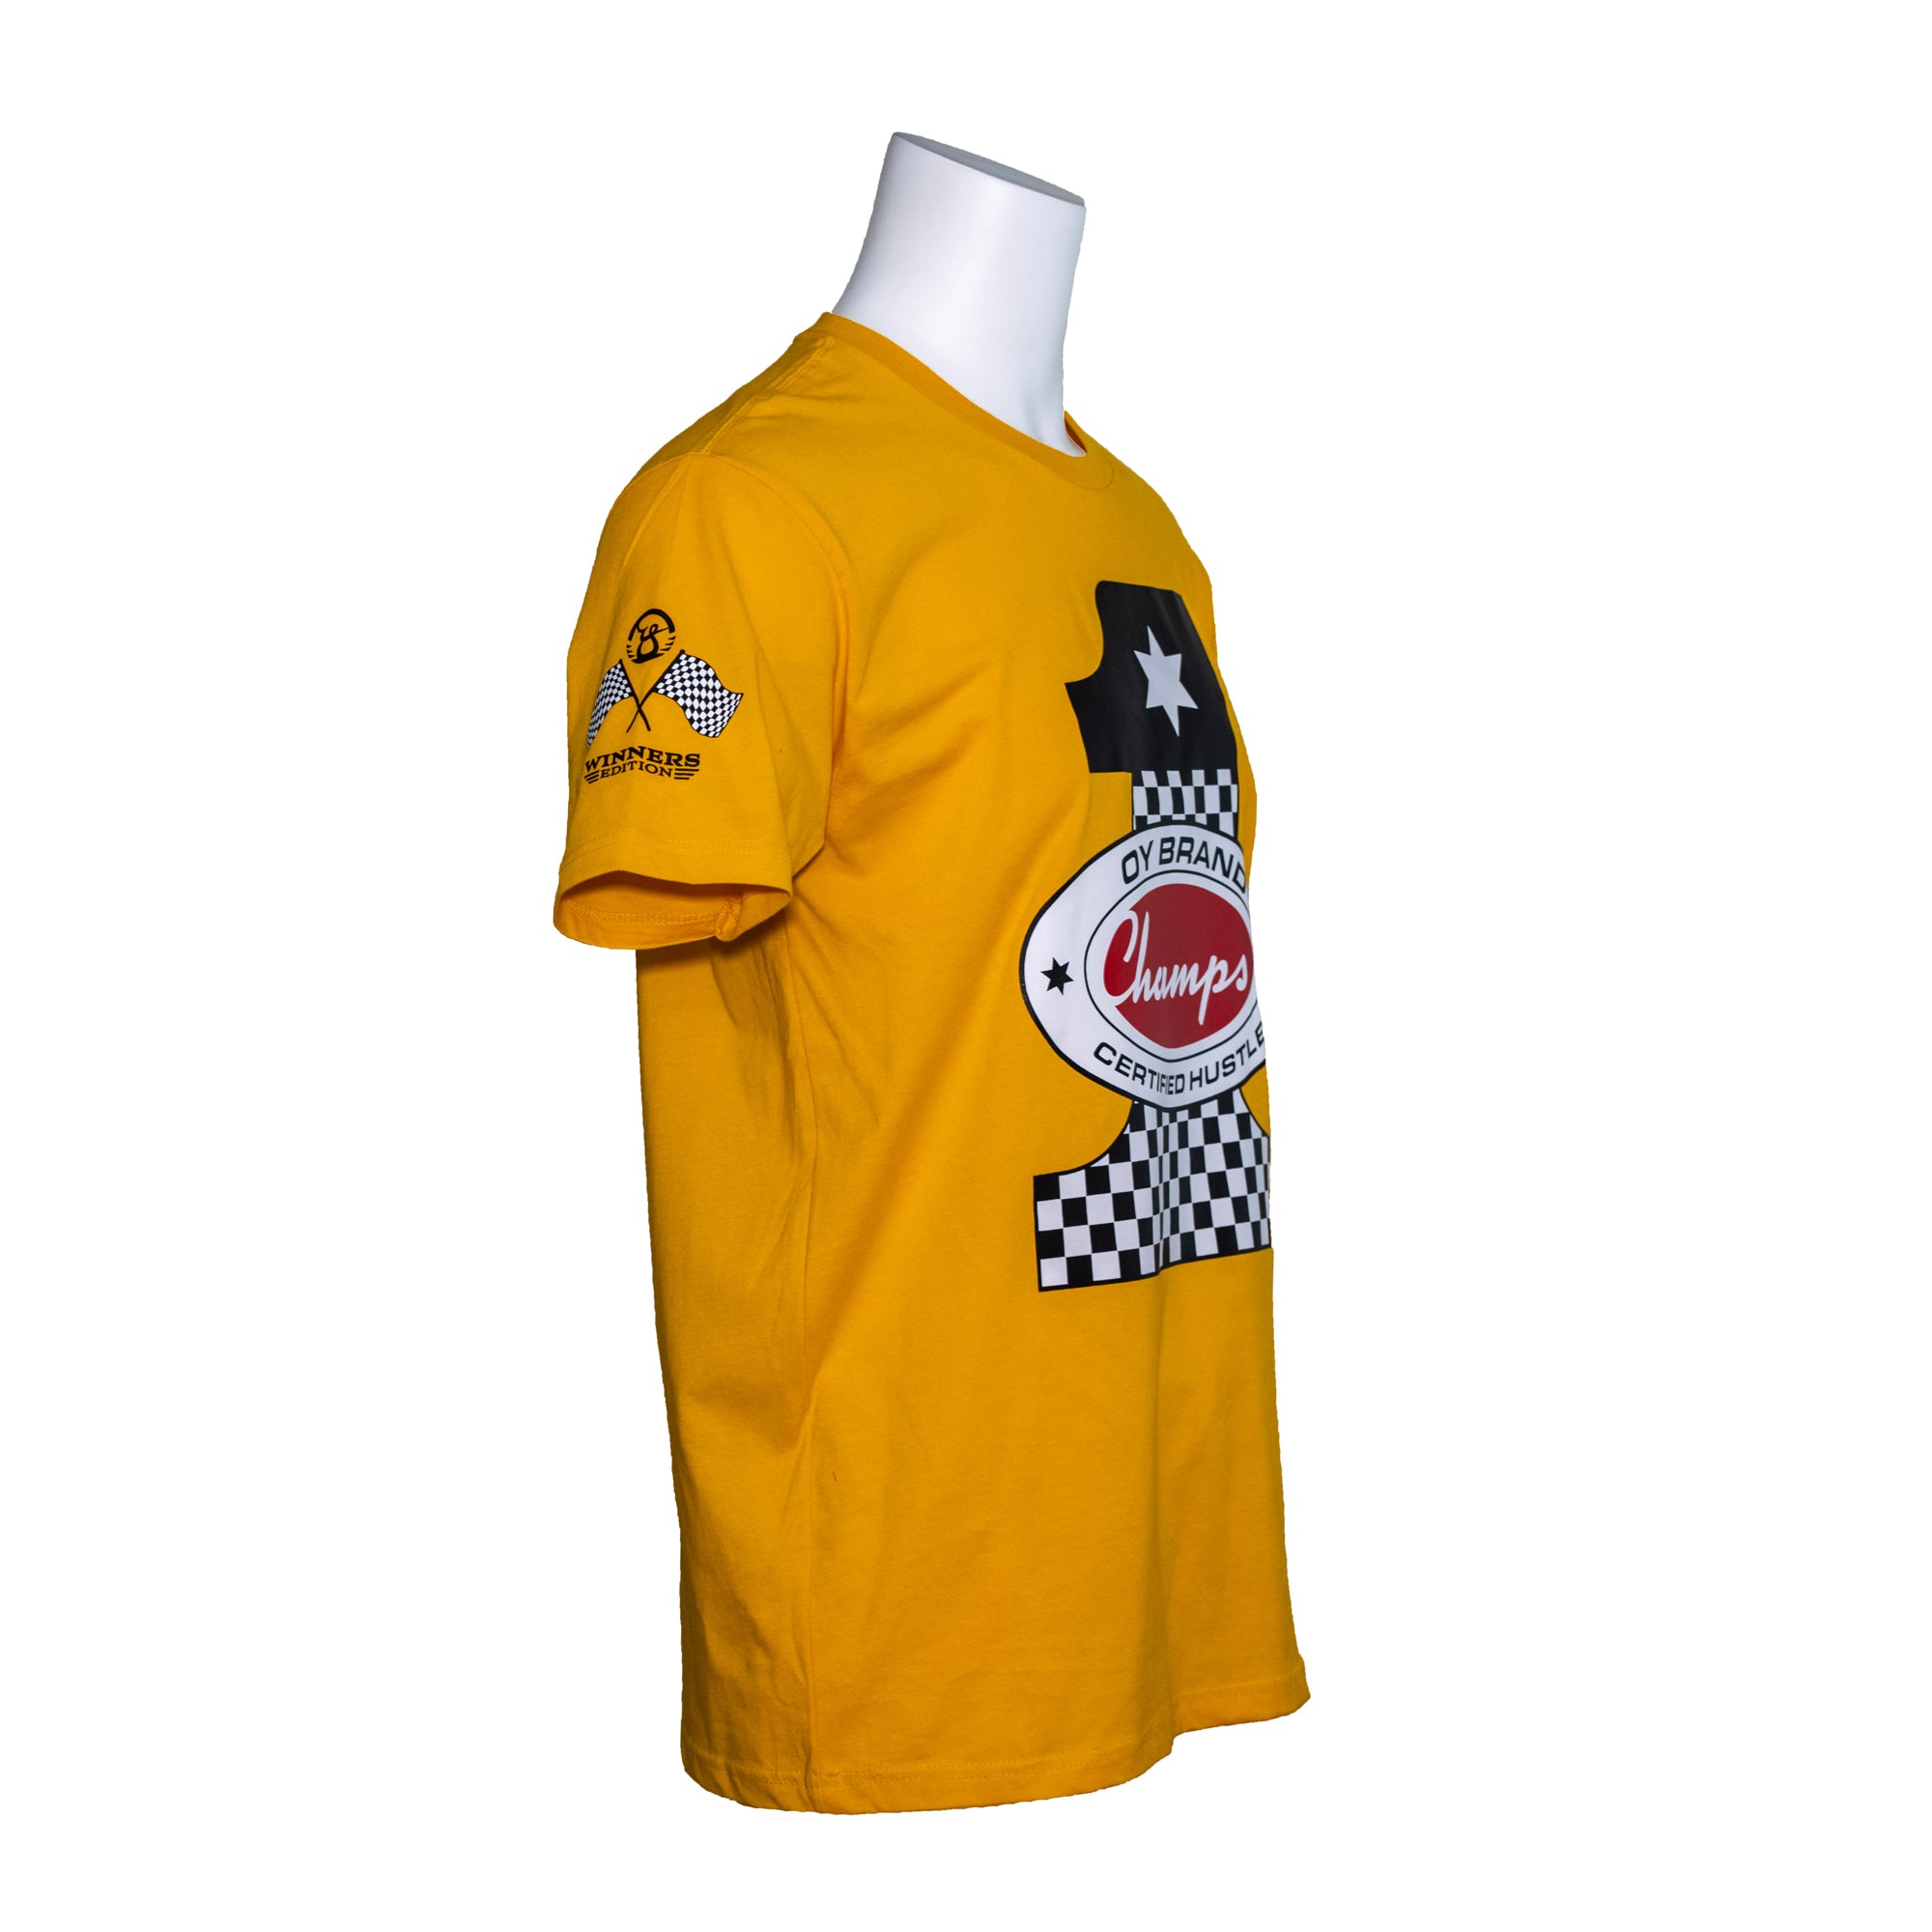 gold oy brand t shirt with number one racing design